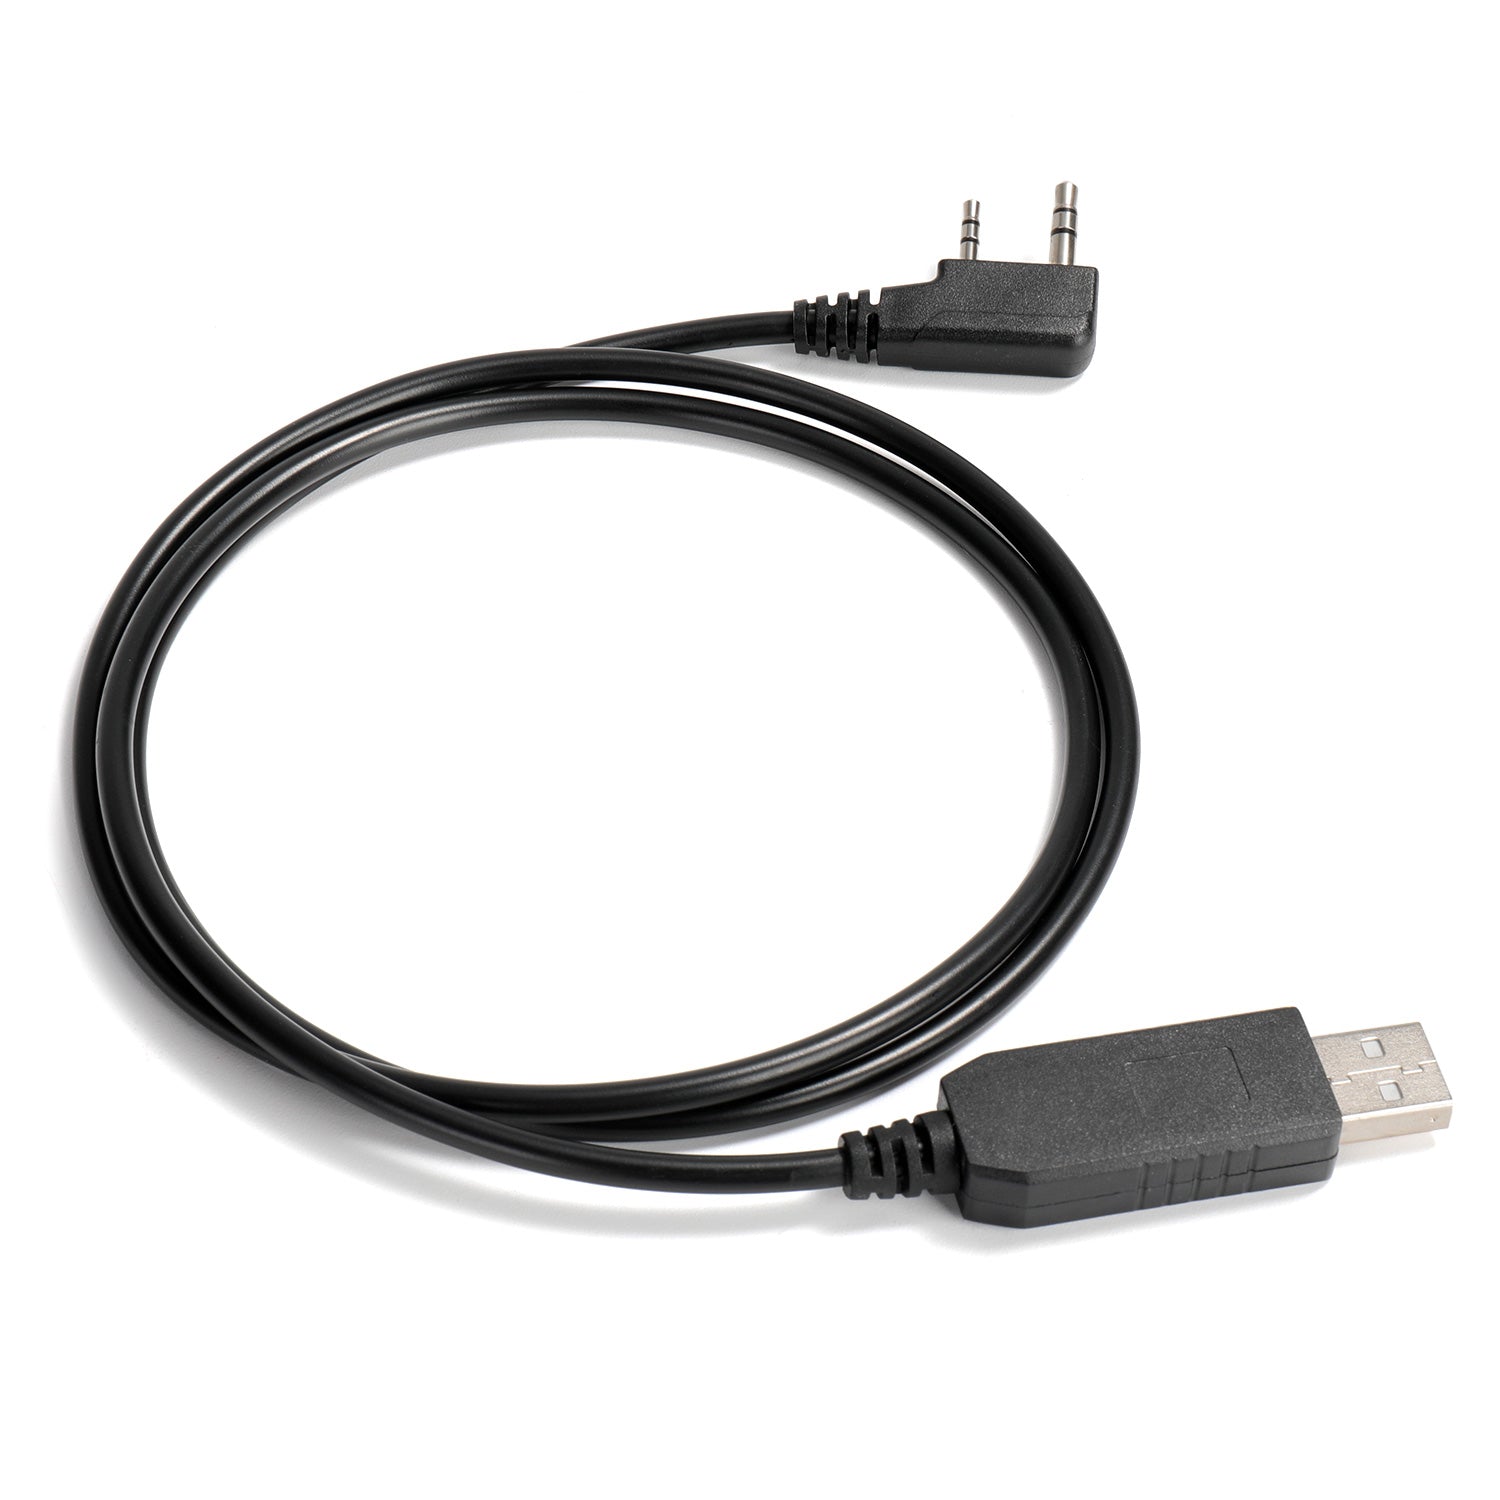 ftdi usb chip cable for mac baofeng